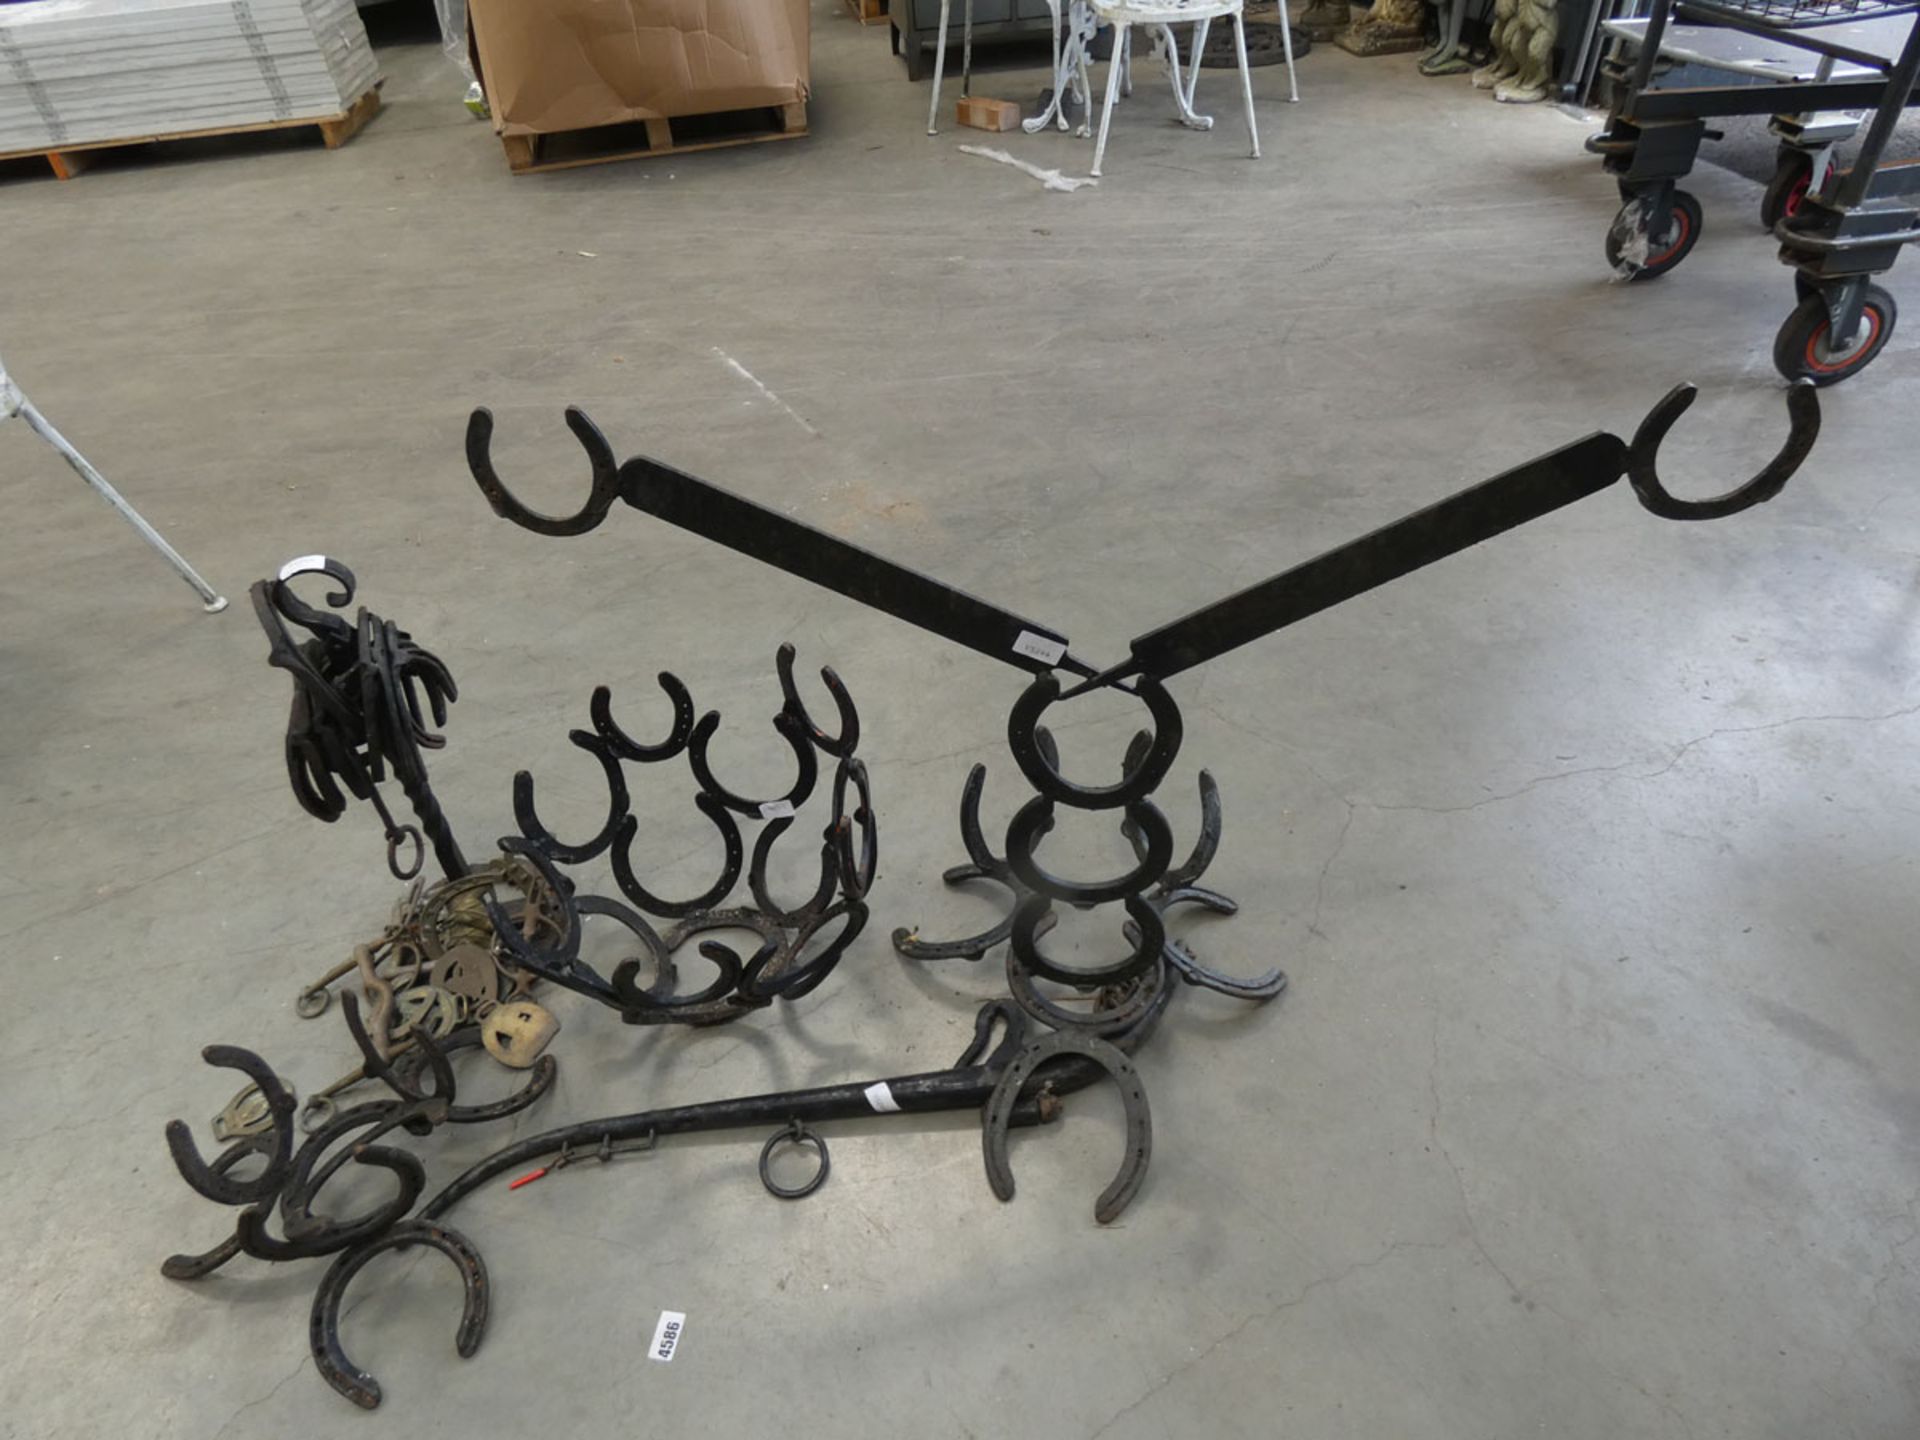 Assortment of horse shoe sculptured items and horse shoes